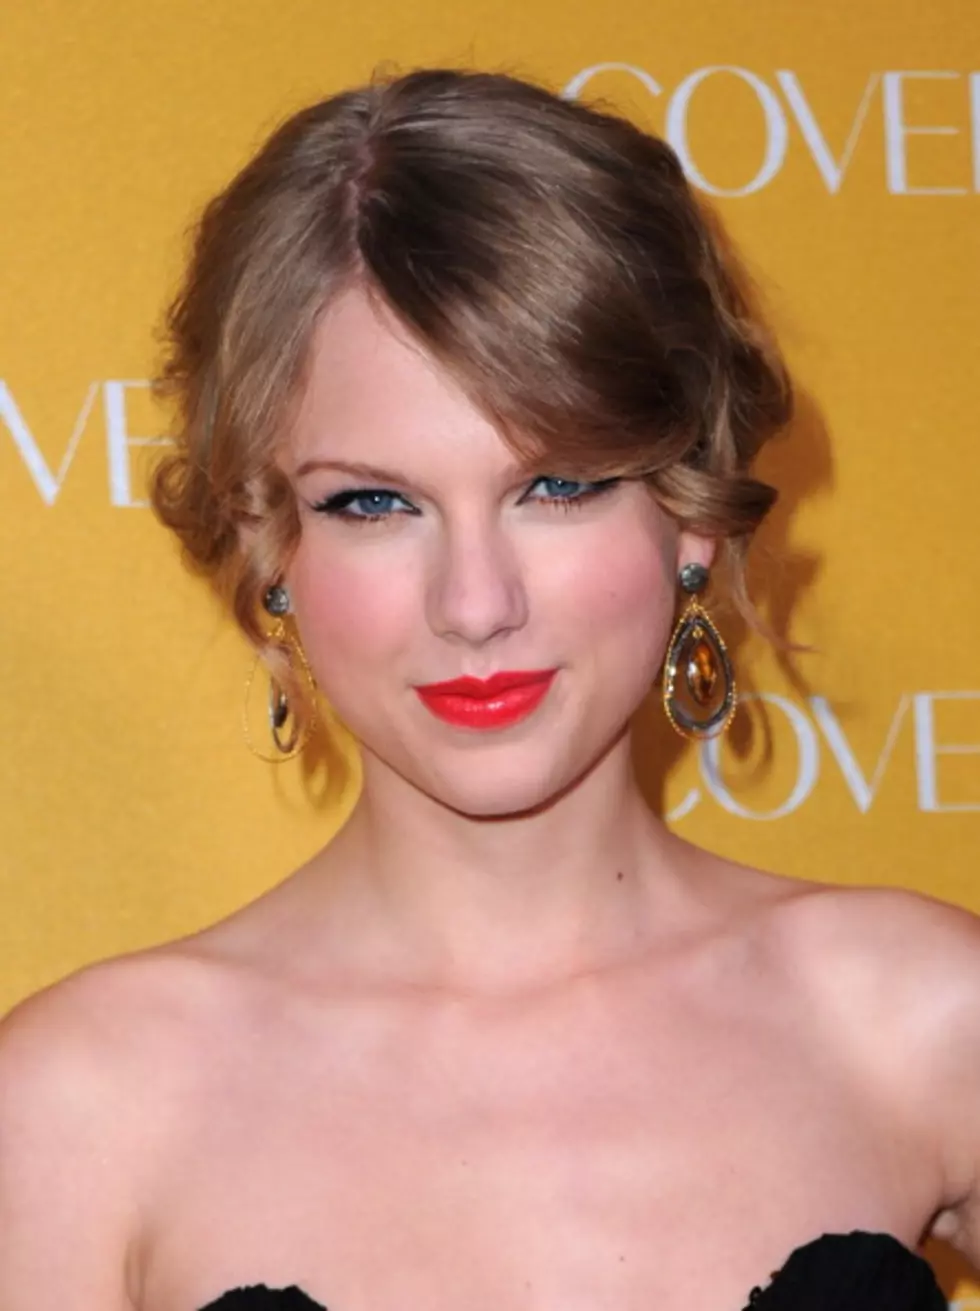 Taylor Swift Has A New CoverGirl Commercial